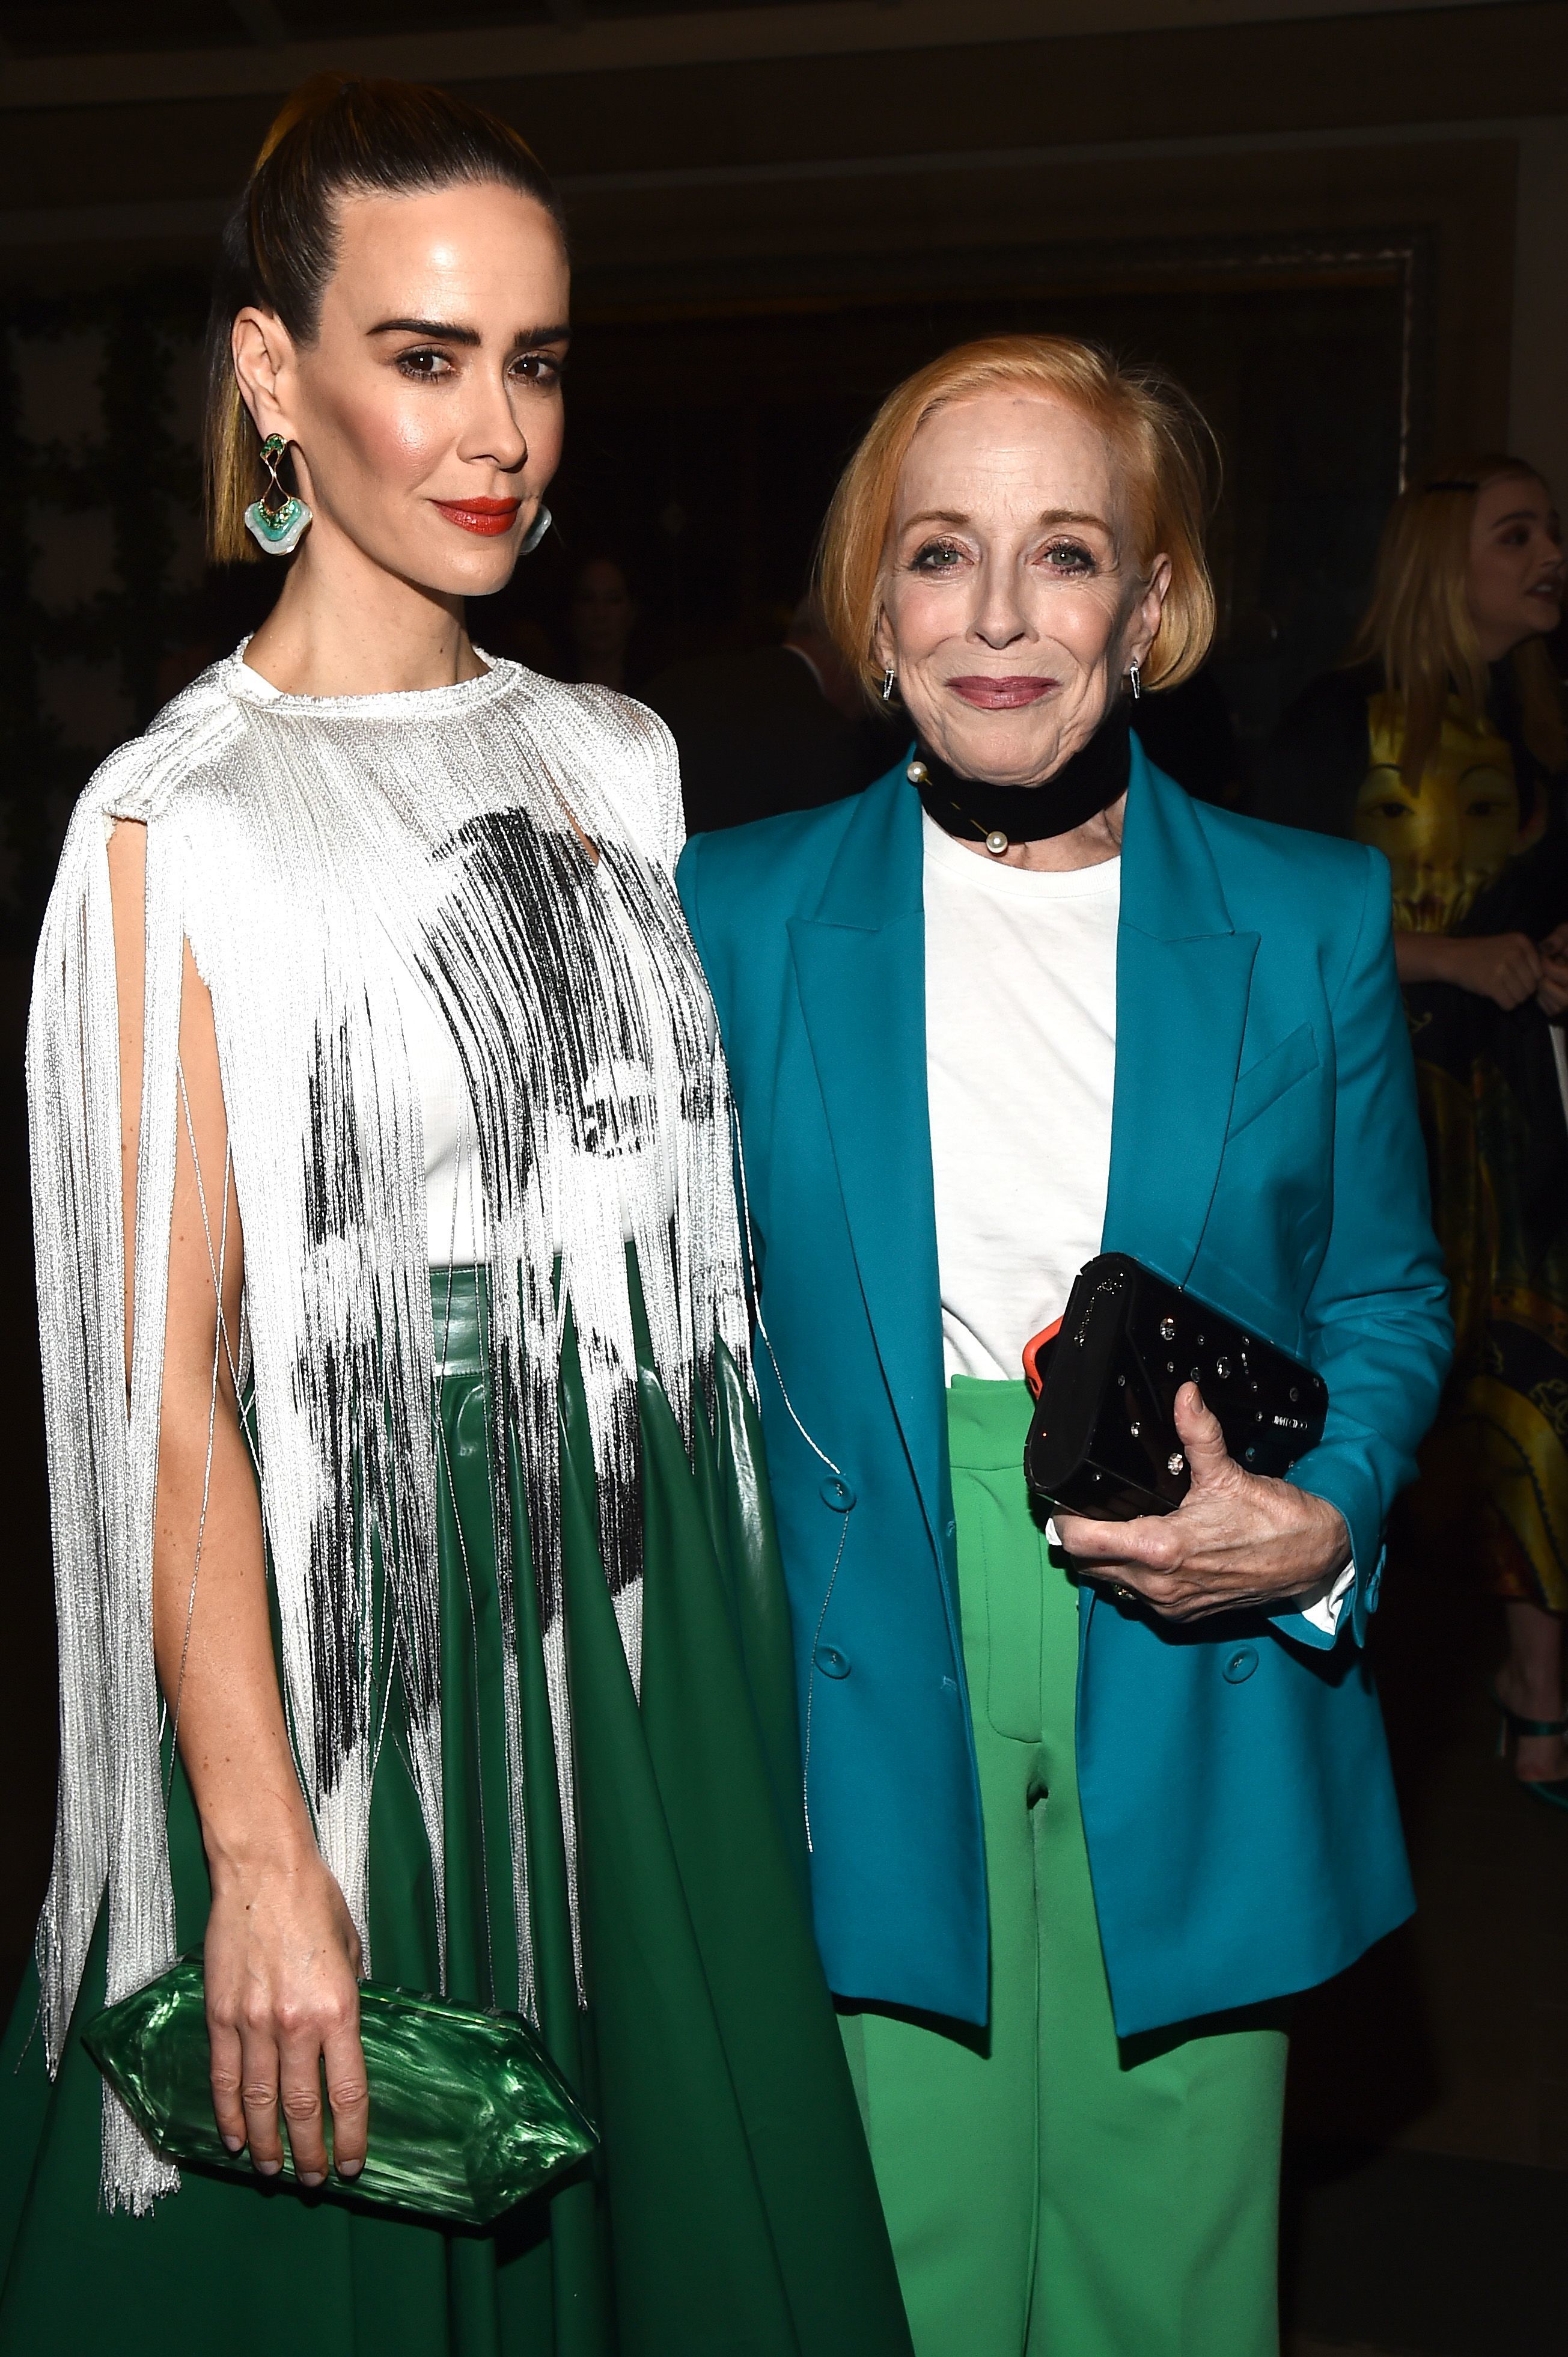 <p>Sarah Paulson and Holland Taylor started their romance after the "Two and a Half Men" alum -- who's 32 years older than the "American Horror Story" franchise star -- slid into Sarah's DMs! "It's a long story. We met a very, very long time ago. I was with someone else," Sarah explained on "Watch What Happens Live With <a href="https://www.wonderwall.com/celebrity/profiles/overview/andy-cohen-1524.article">Andy Cohen</a>" in January 2019. They eventually reconnected while working on a project at another star's place. "We were doing a thing at Martha Plimpton's house. It was for an organization that she was working with and we were both doing a little PSA for it," Sarah explained. "We sort of breezed by each other and started following each other on Twitter." Some direct messages followed, and that was it. The couple's romance was made public in late 2015.</p>